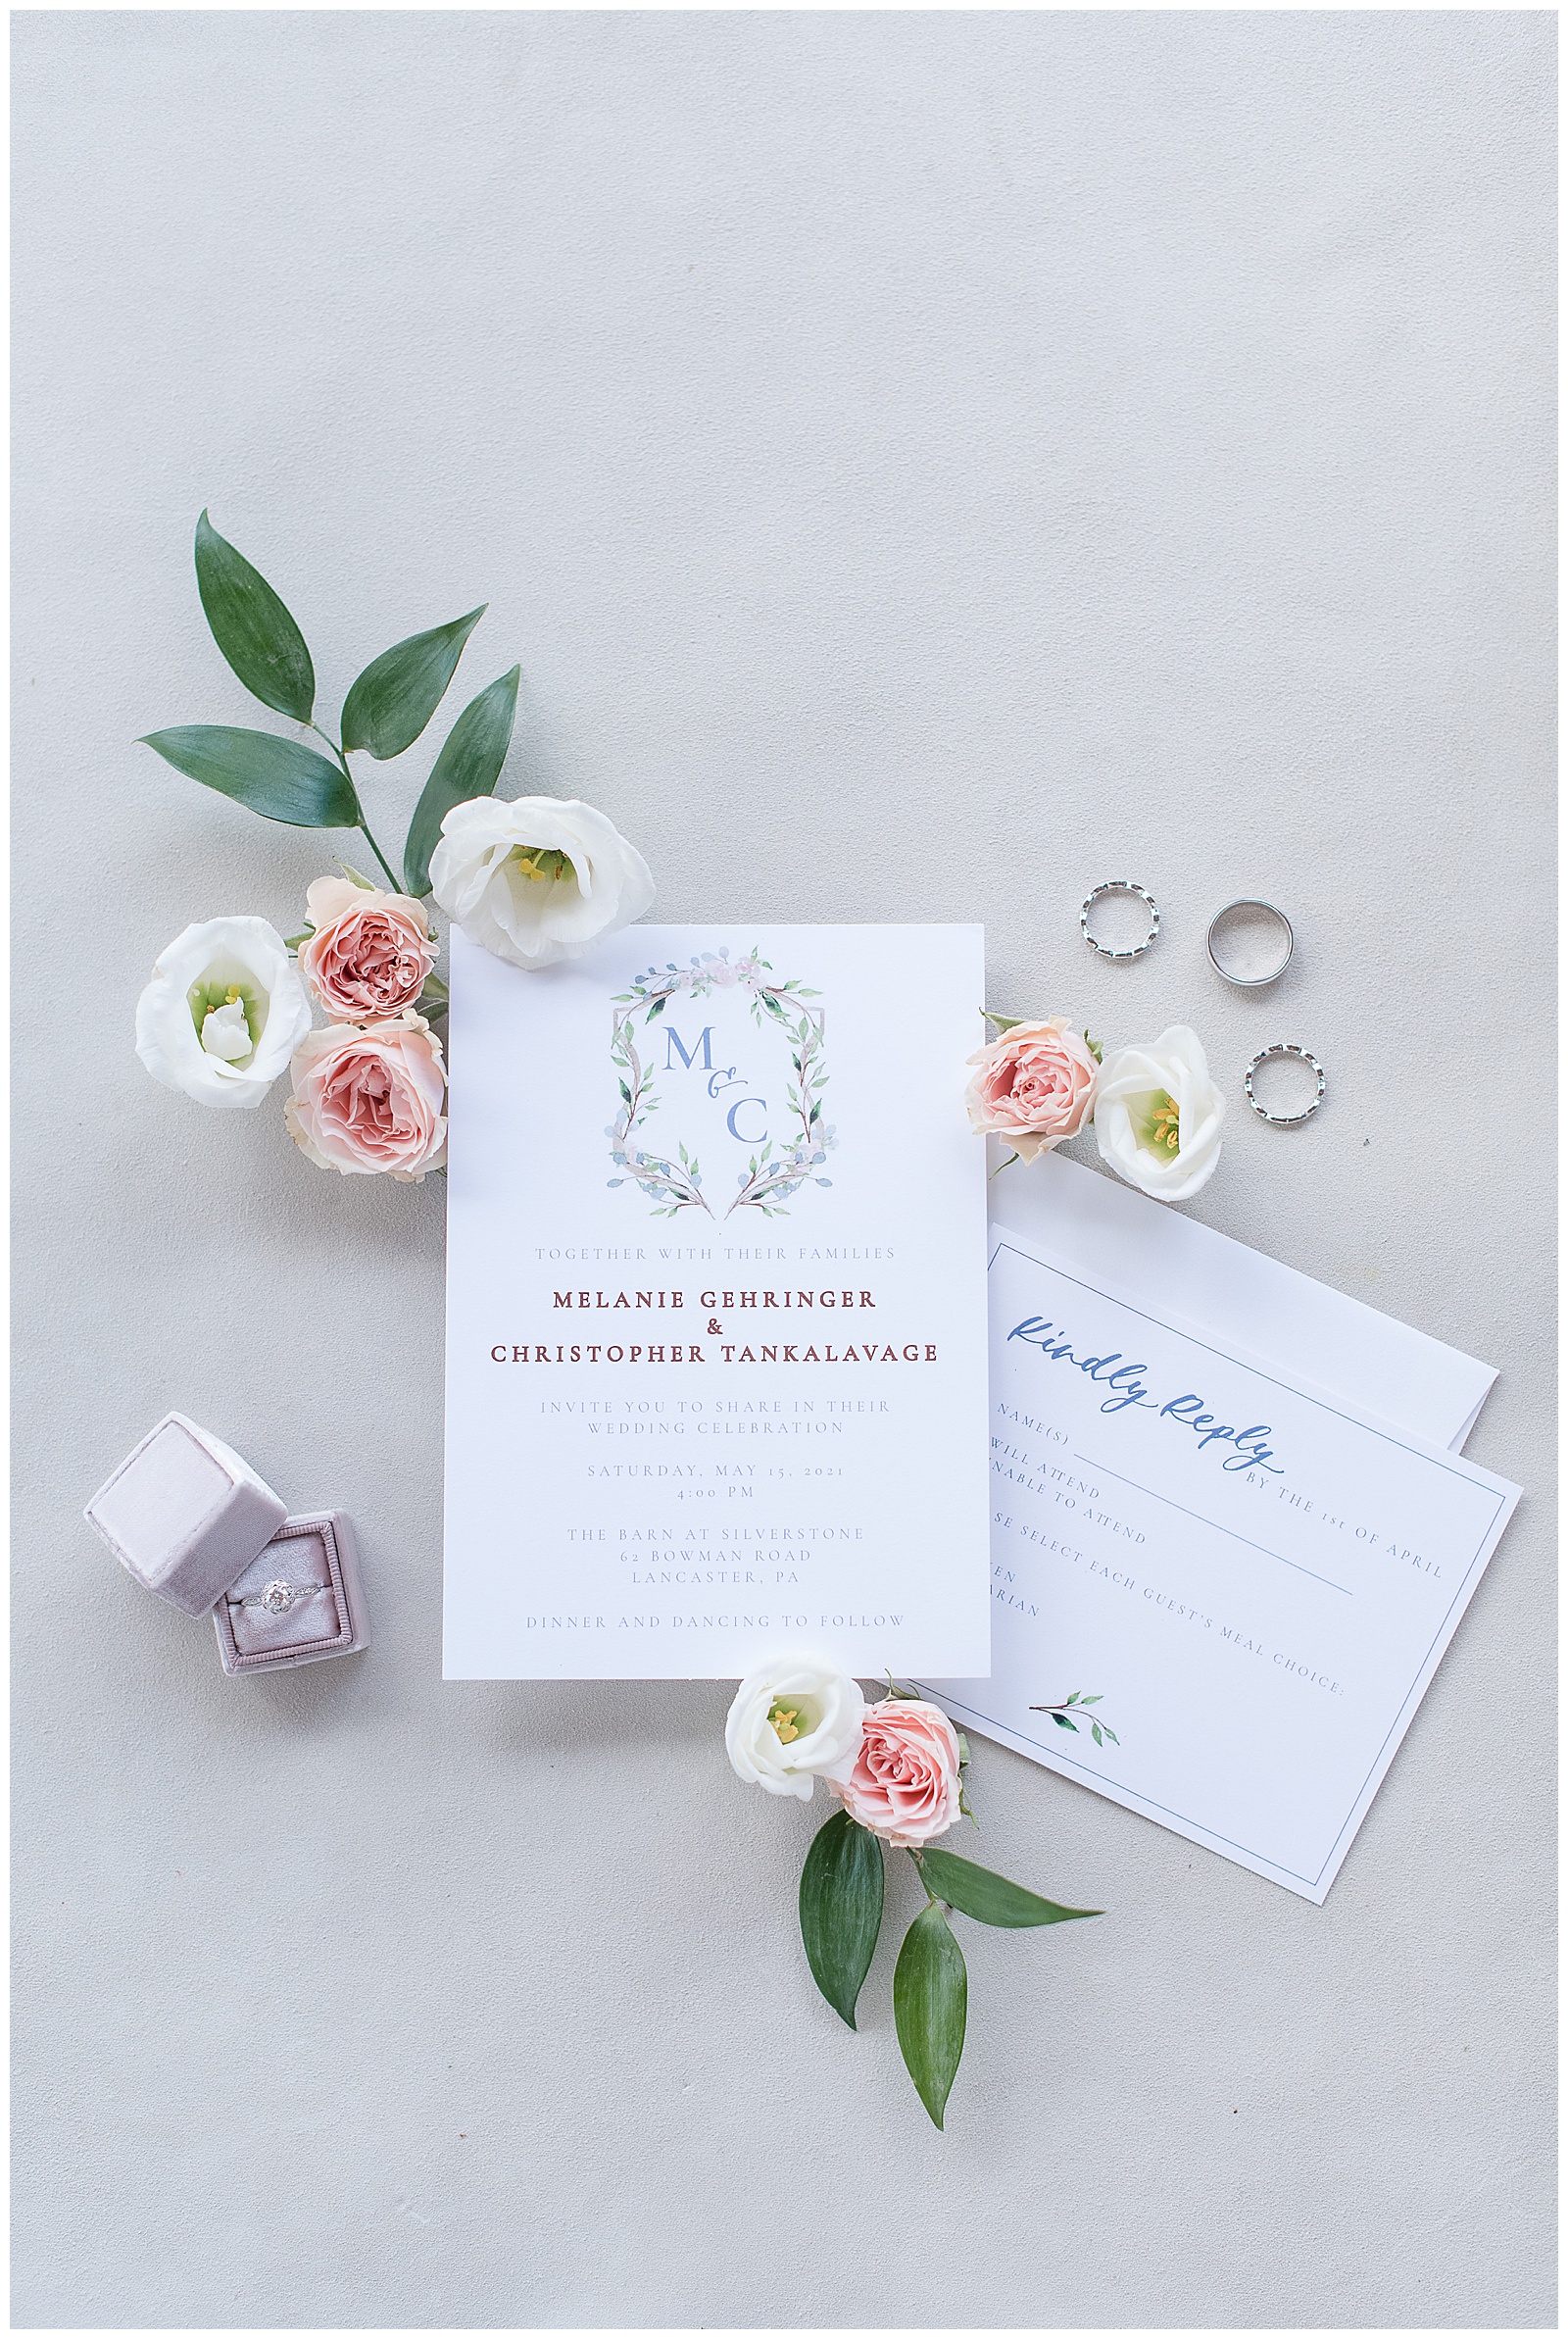 wedding invitation and wedding rings displayed with beautiful flowers placed around them on spring wedding day